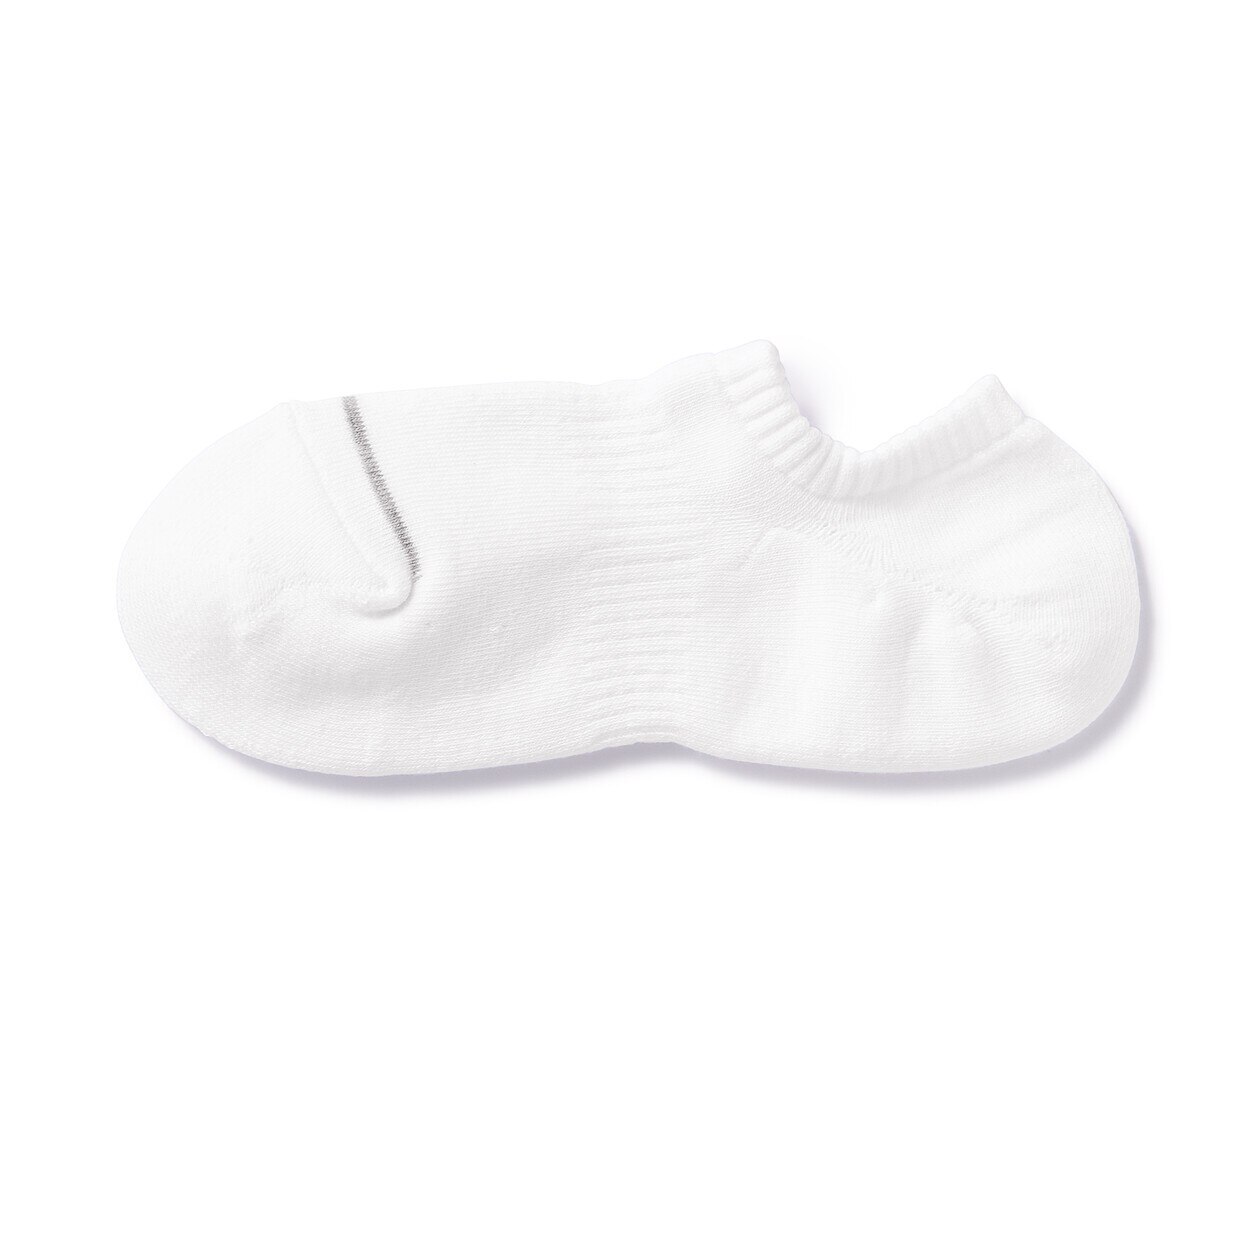 Right Angle Low Rise Trainer Socks